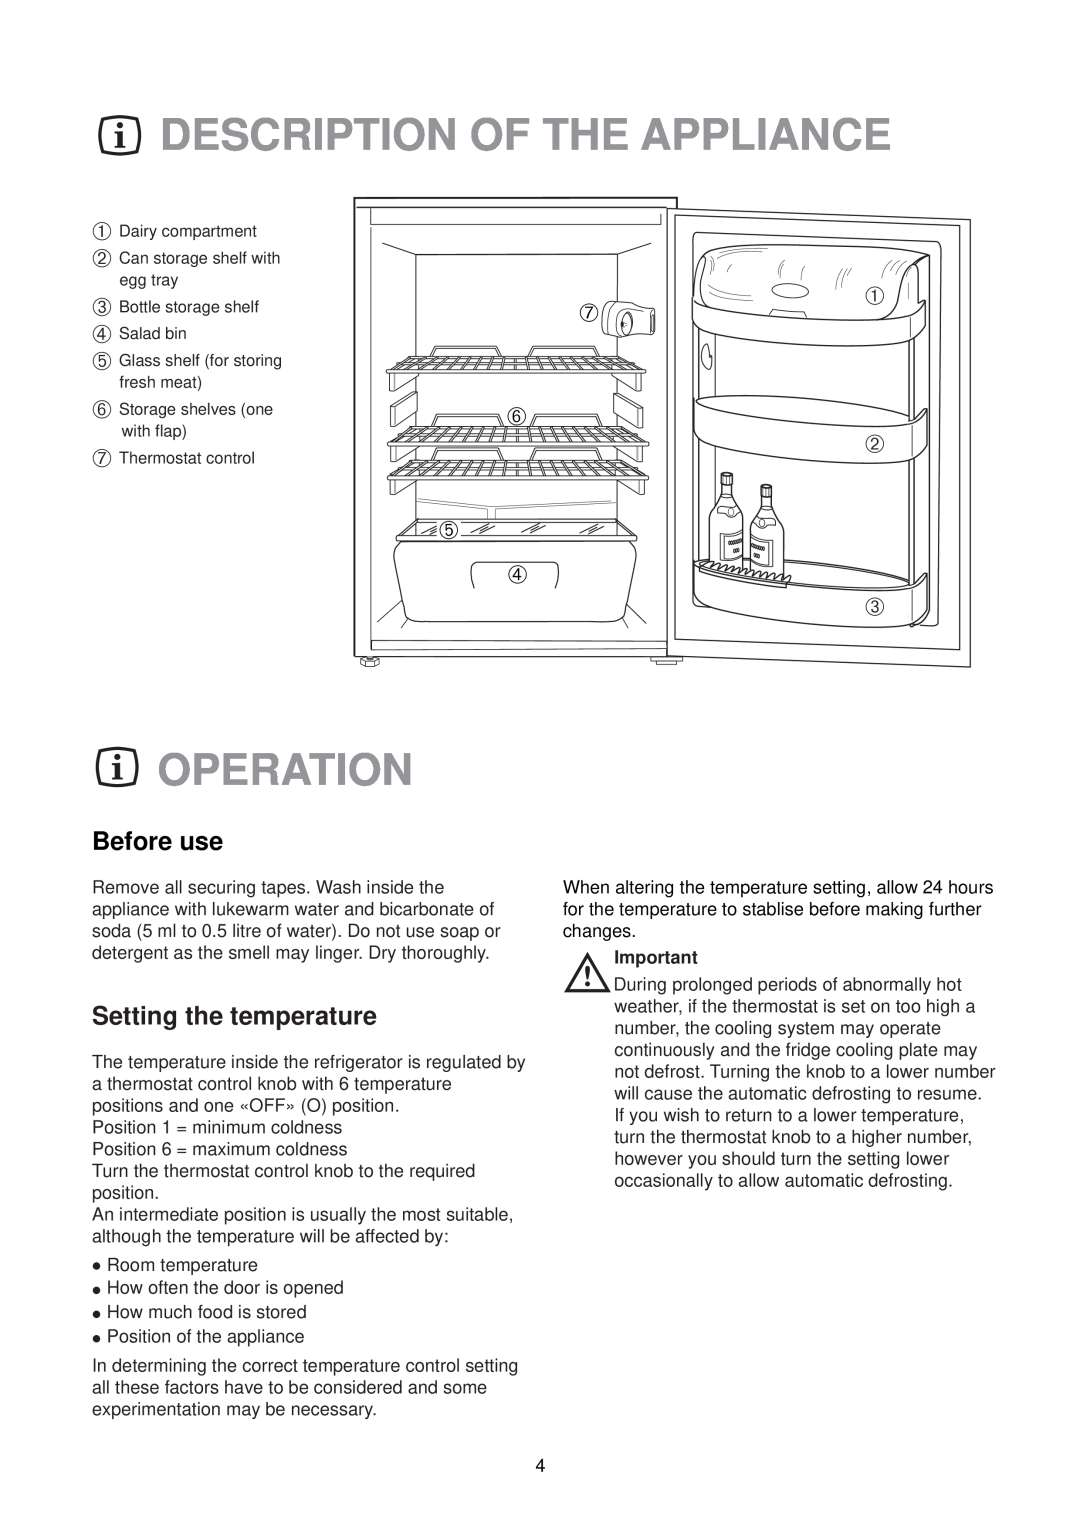 Electrolux U21312 manual Description Of The Appliance, Operation, ➆ ➅ ➄, Before use, Setting the temperature 